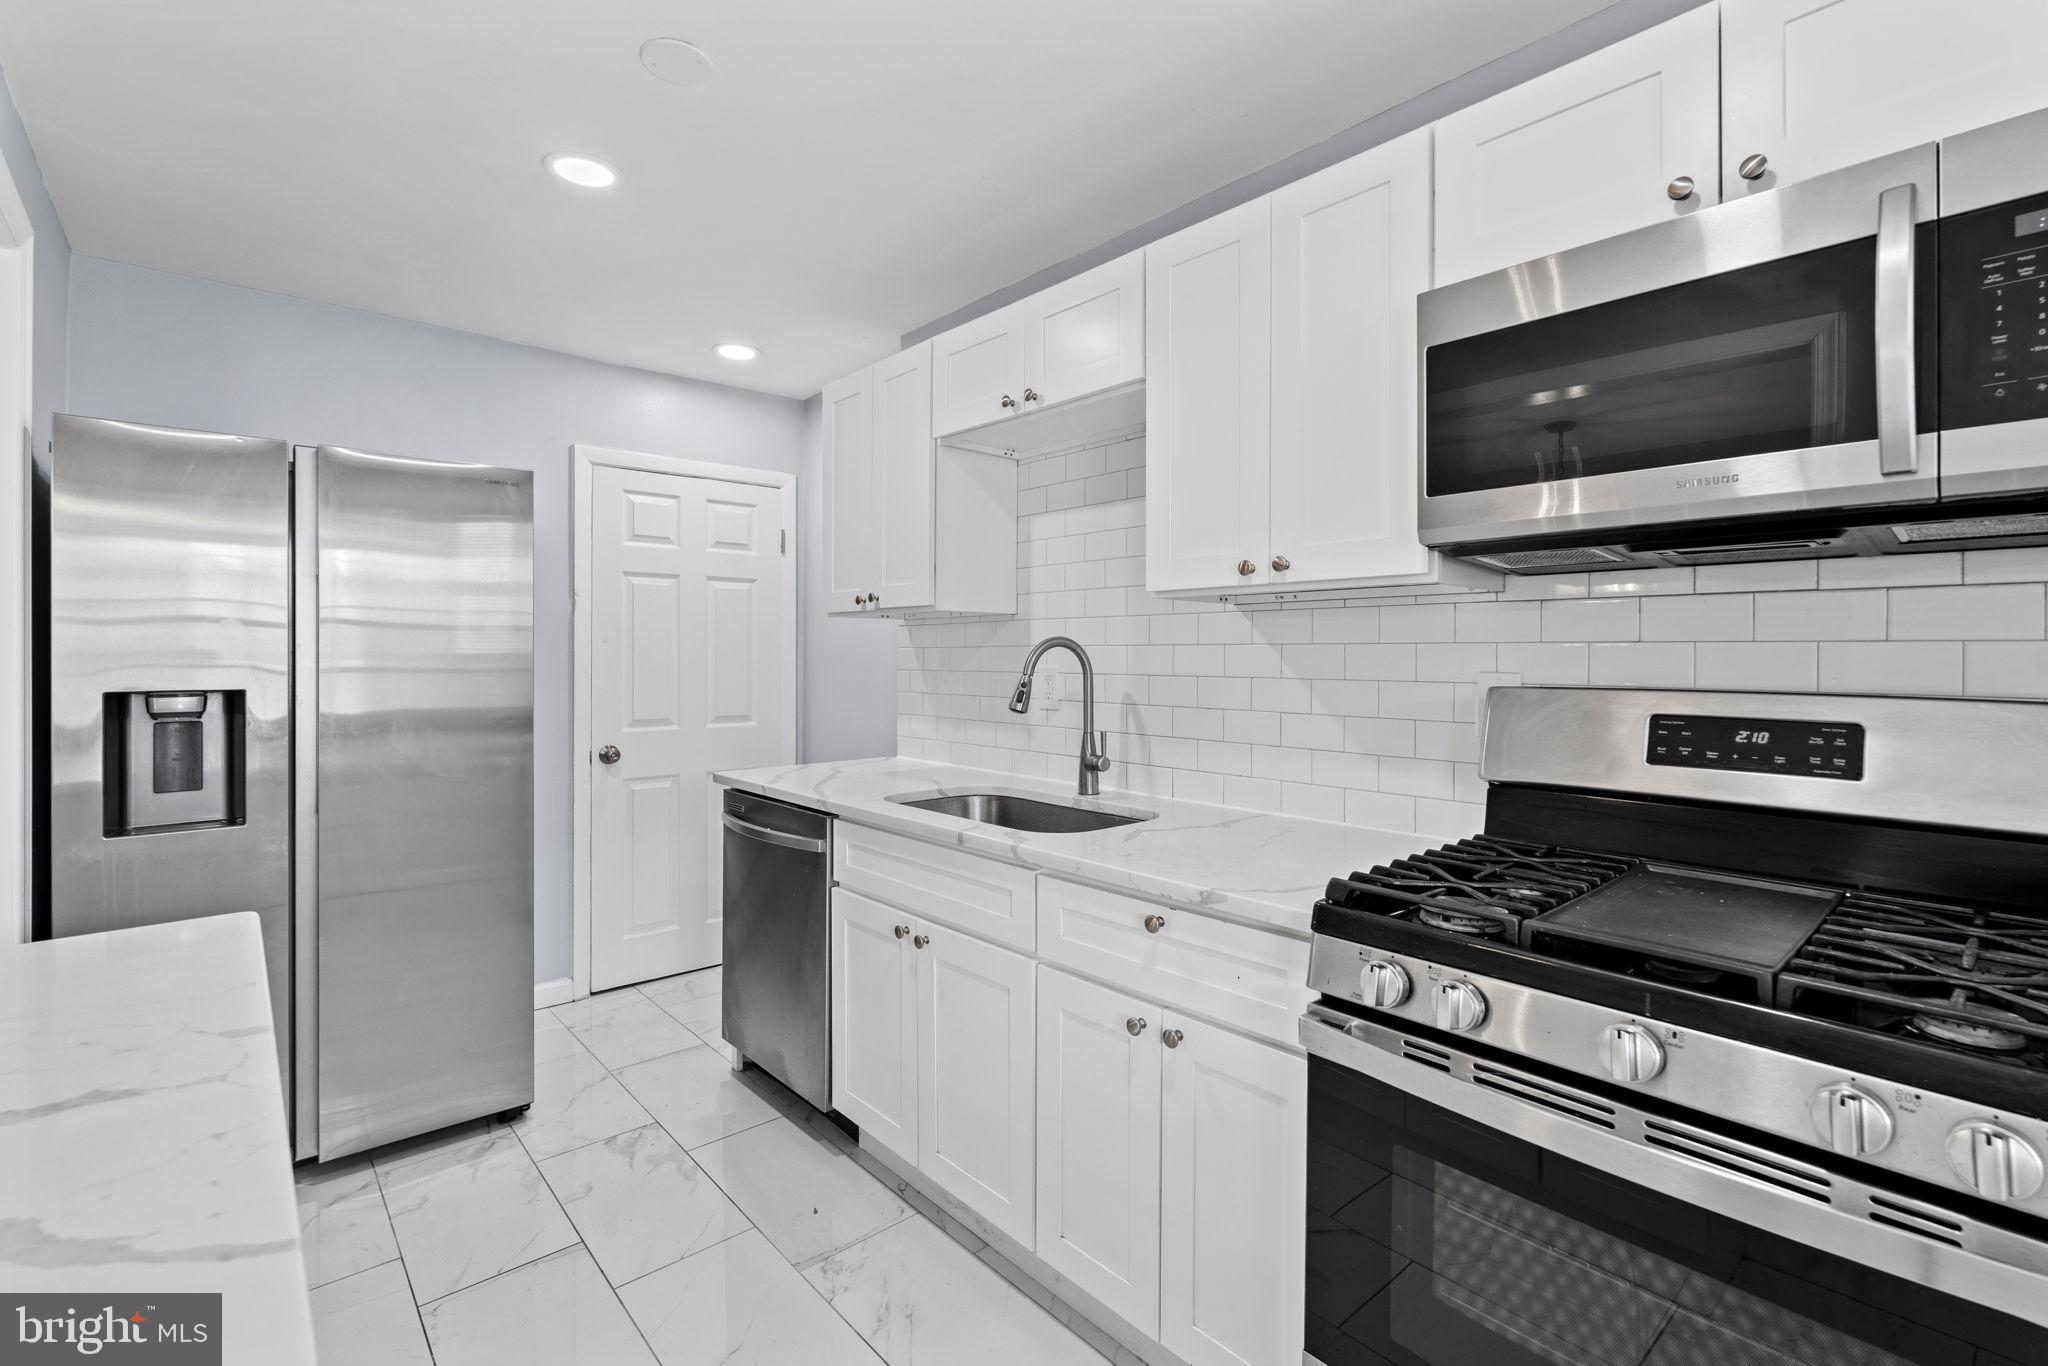 a kitchen with stainless steel appliances a sink a stove and microwave